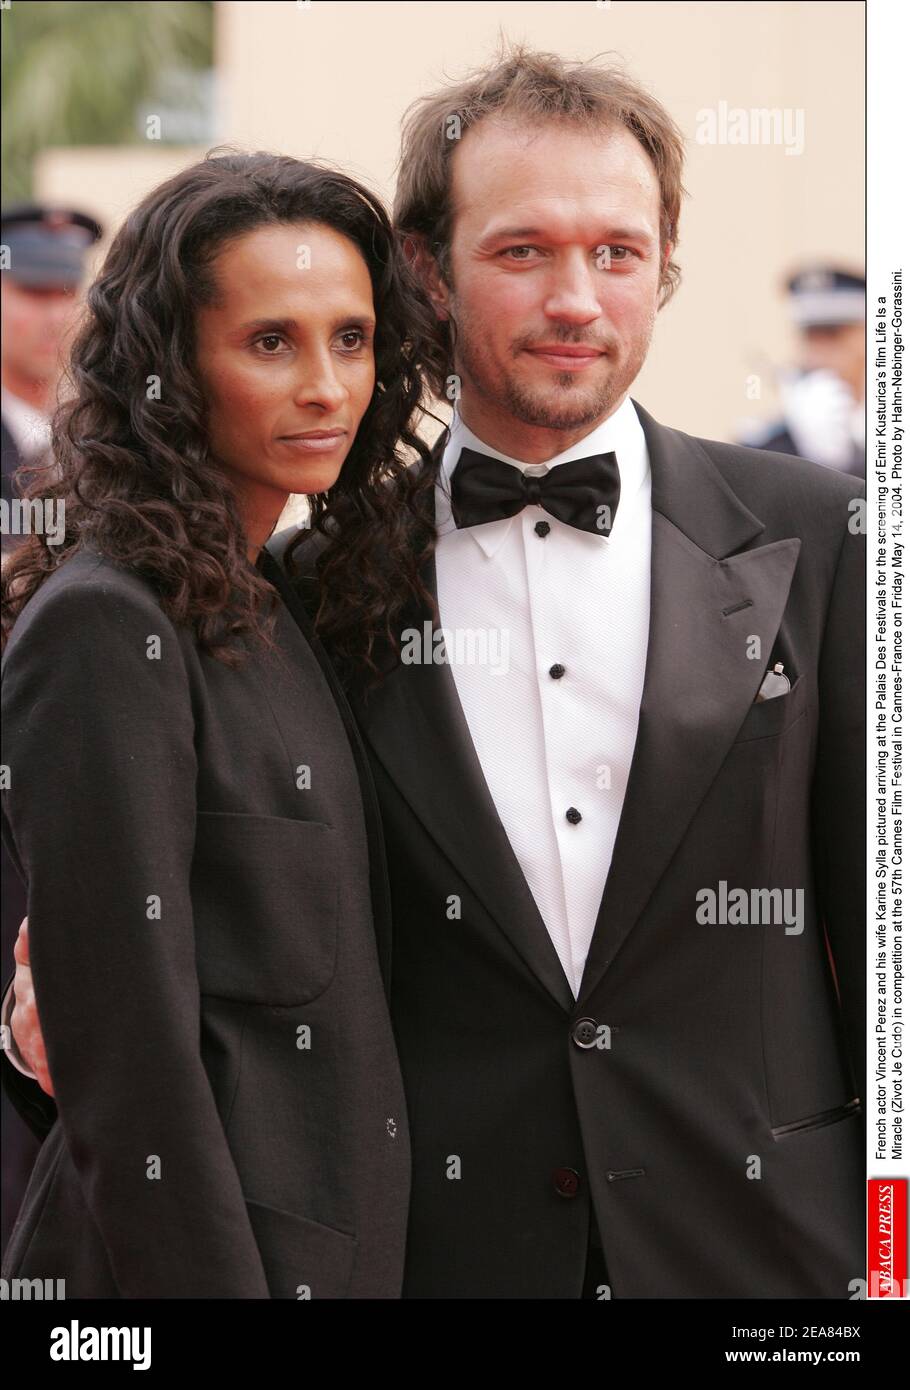 Swiss actor Vincent Perez and his wife Karine Sylla pictured arriving at the Palais Des Festivals for the screening of Emir Kusturica's film Life Is a Miracle (Zivot Je Cudo) in competition at the 57th Cannes Film Festival in Cannes-France on Friday May 14, 2004. Photo by Hahn-Nebinger-Gorassini. Stock Photo